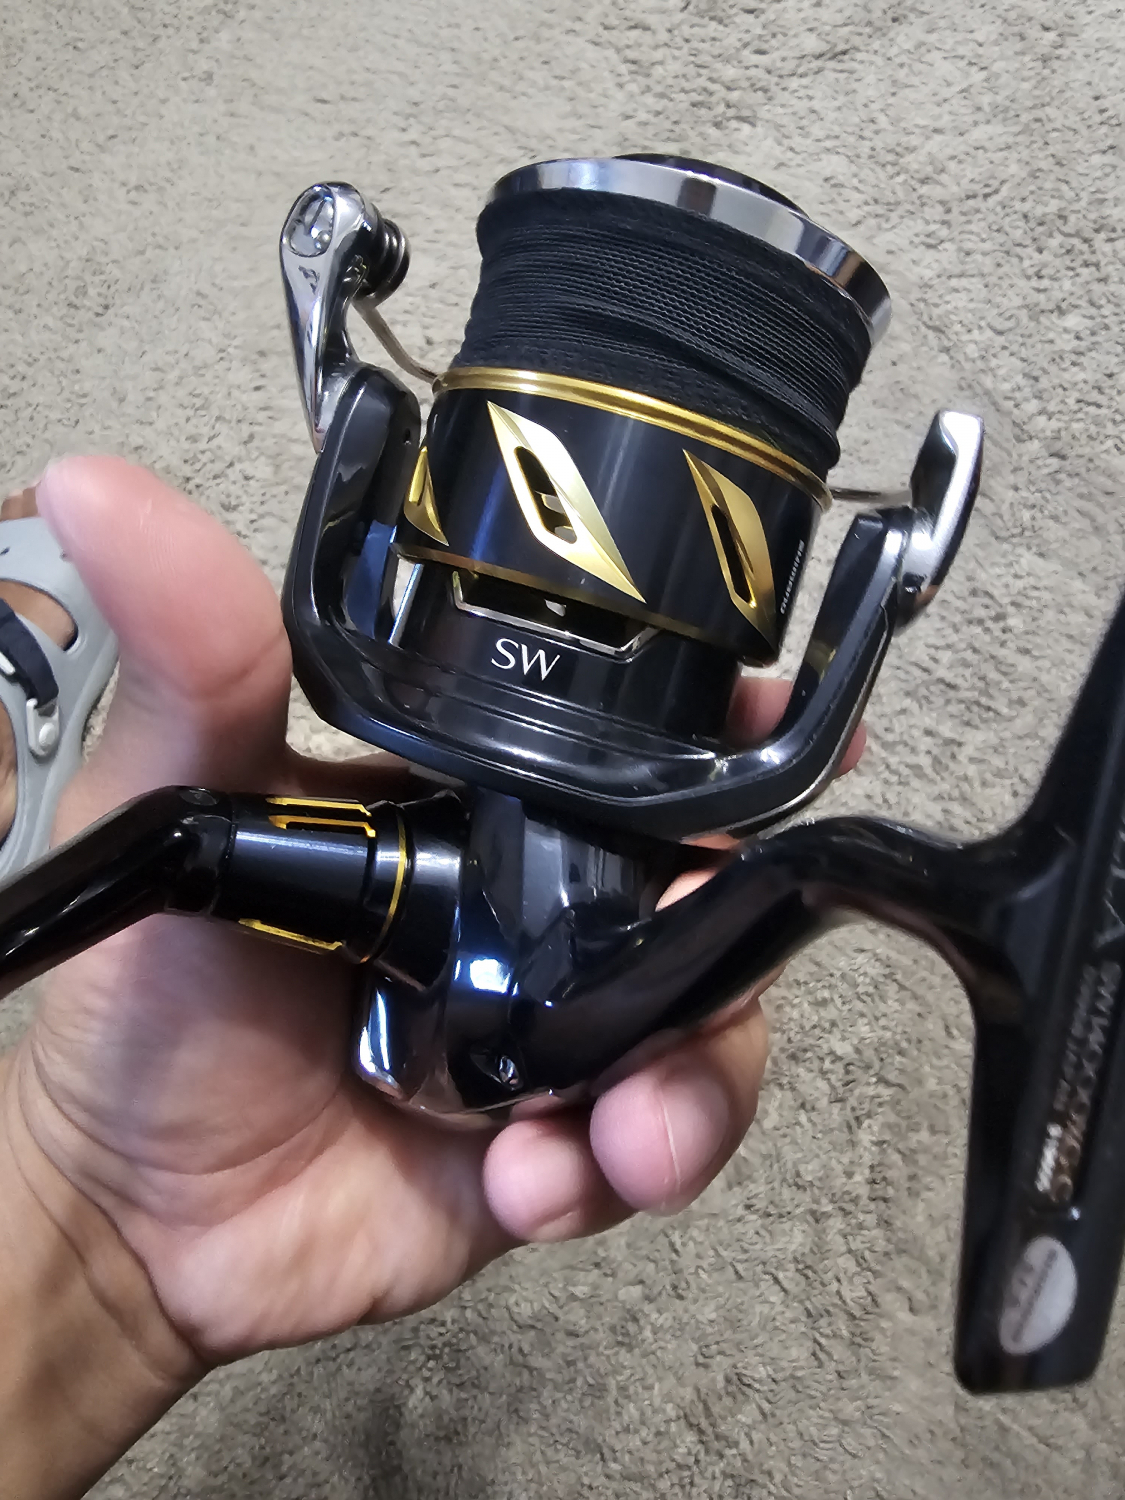 BEST MOST EXPENSIVE FISHING REELS IN THE WORLD? Shimano Stella and